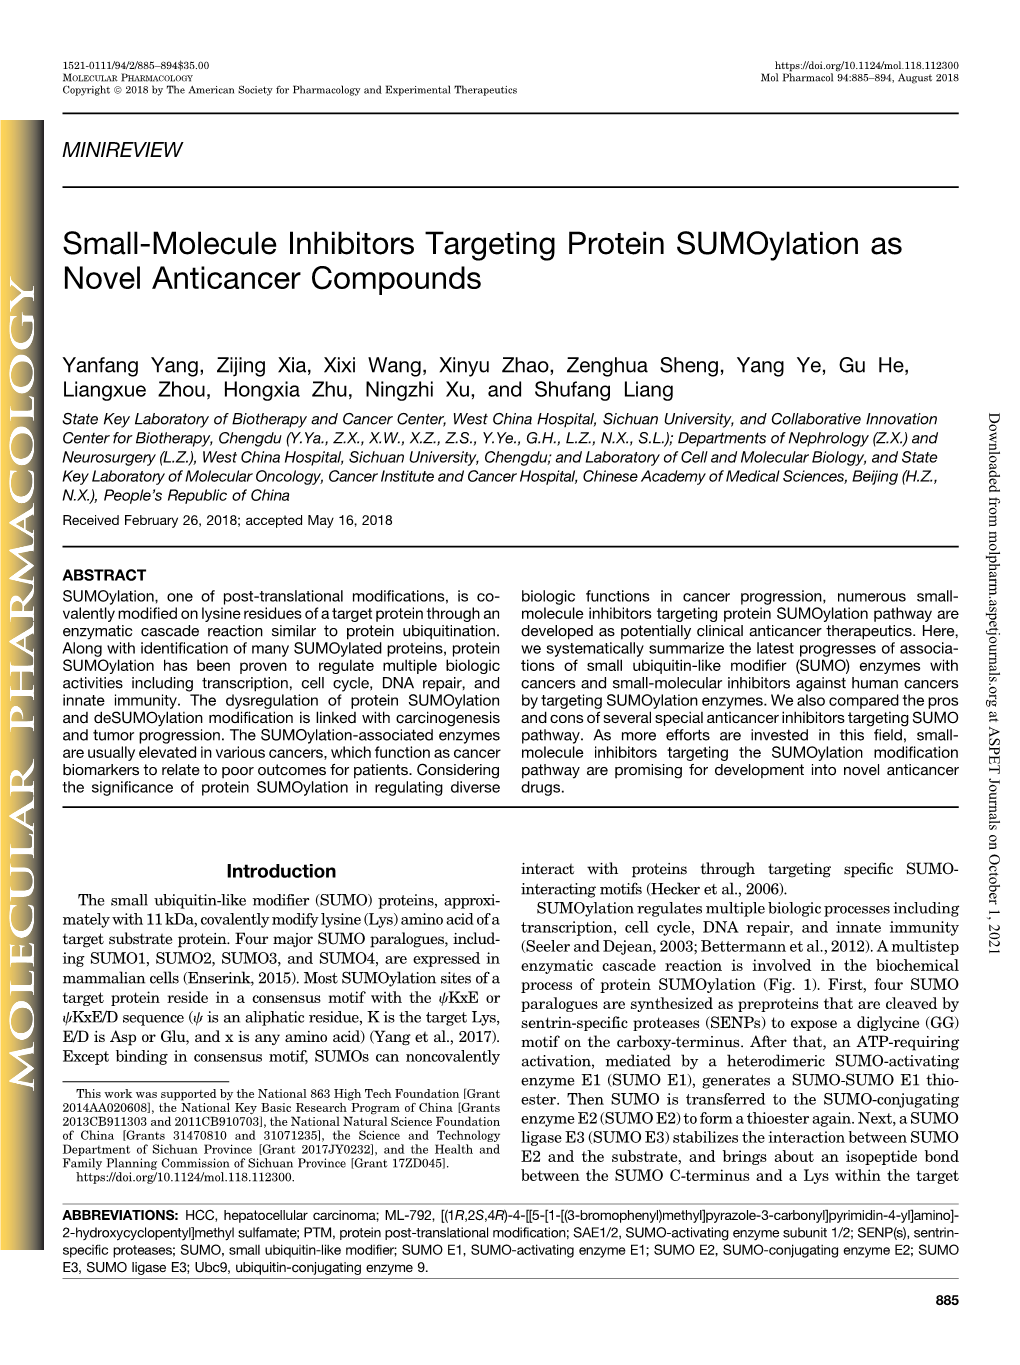 Small-Molecule Inhibitors Targeting Protein Sumoylation As Novel Anticancer Compounds